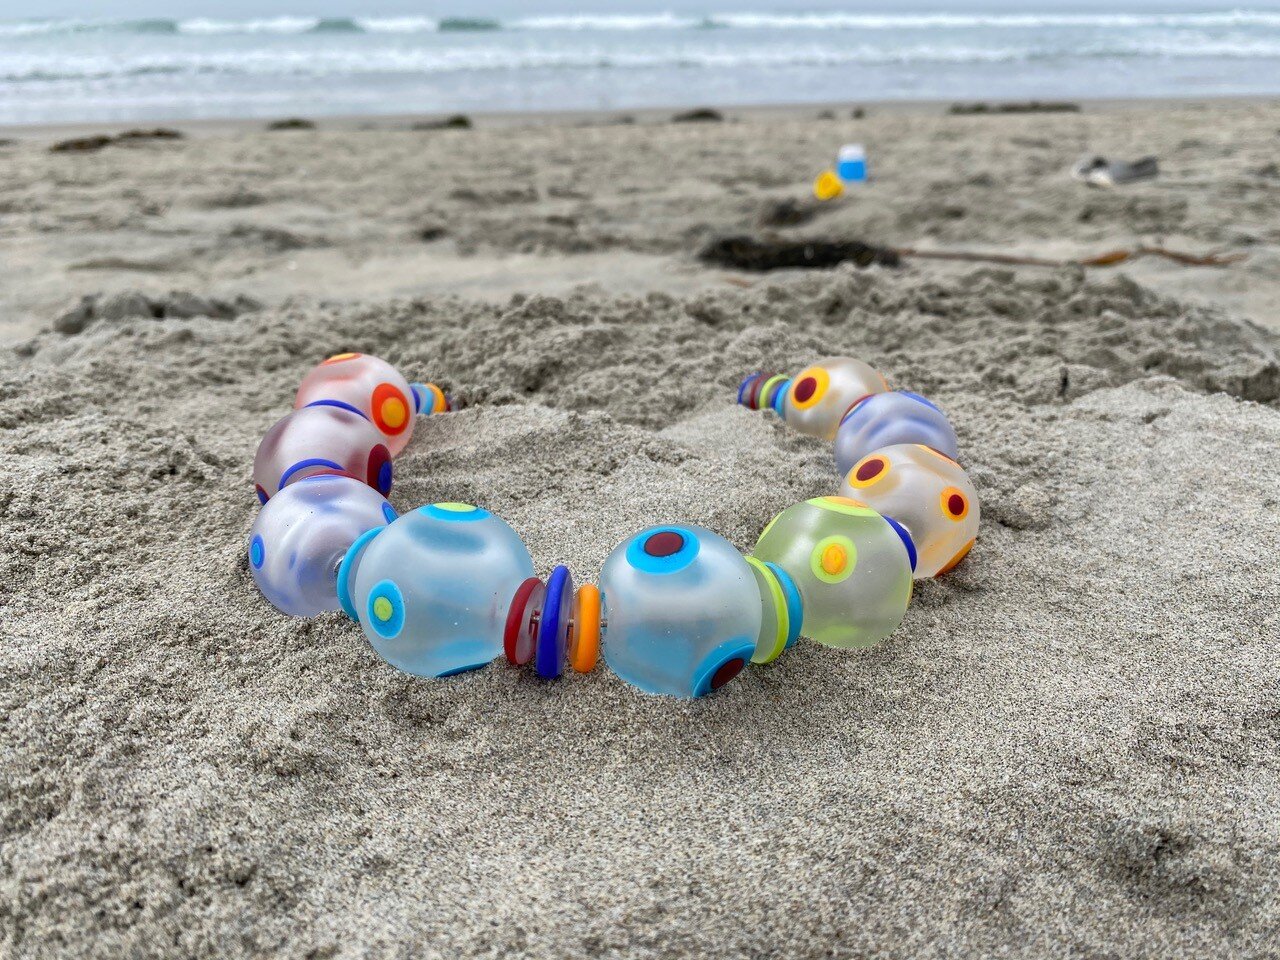 HT-tumbled bead necklace at the beach.jpg